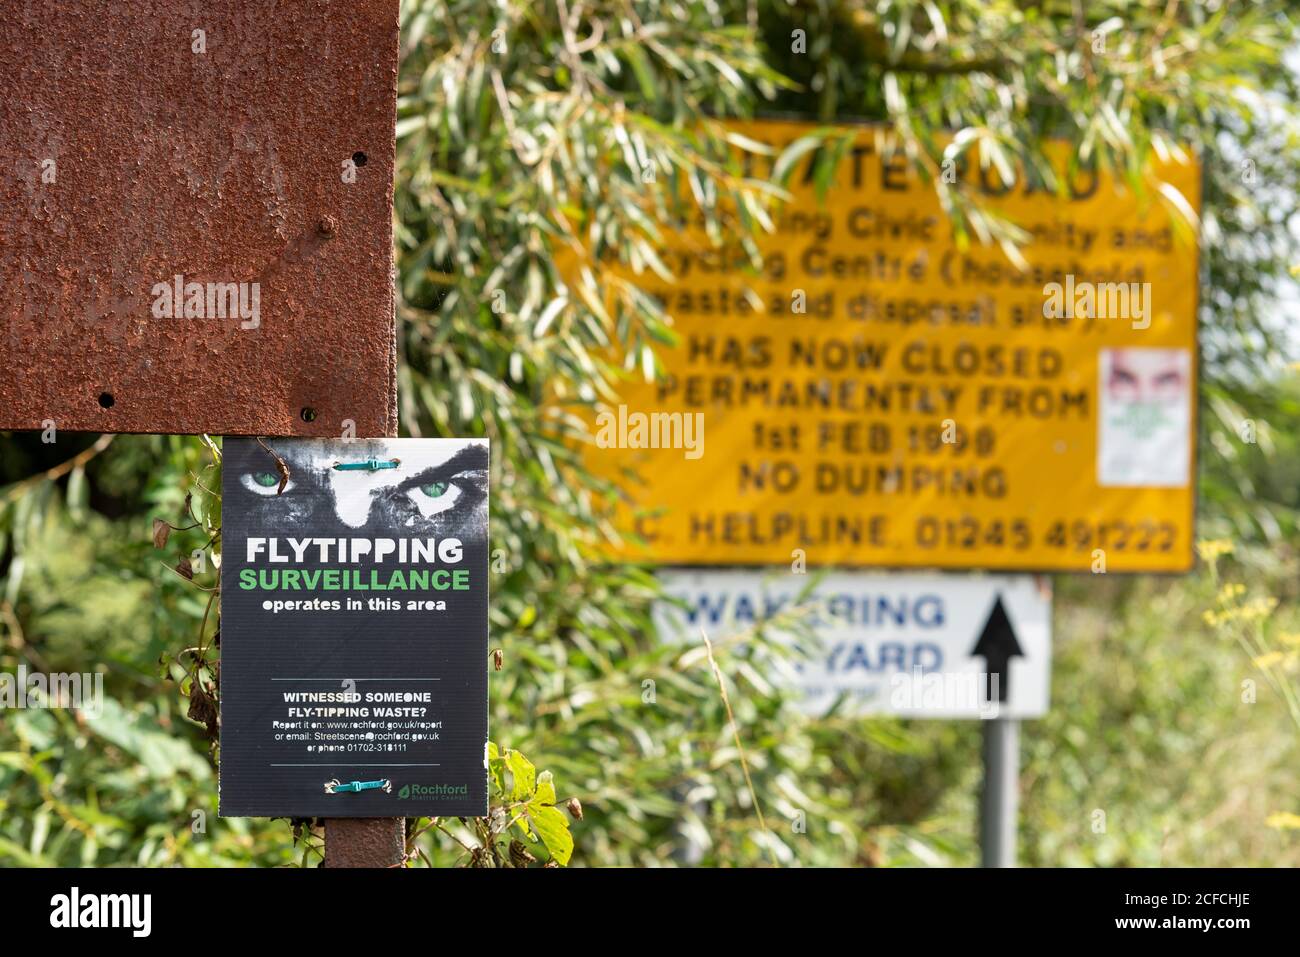 Flytipping, fly tipping, surveillance warning sign in Great Wakering, Essex, UK. Rural country lane on route to closed waste disposal site Stock Photo